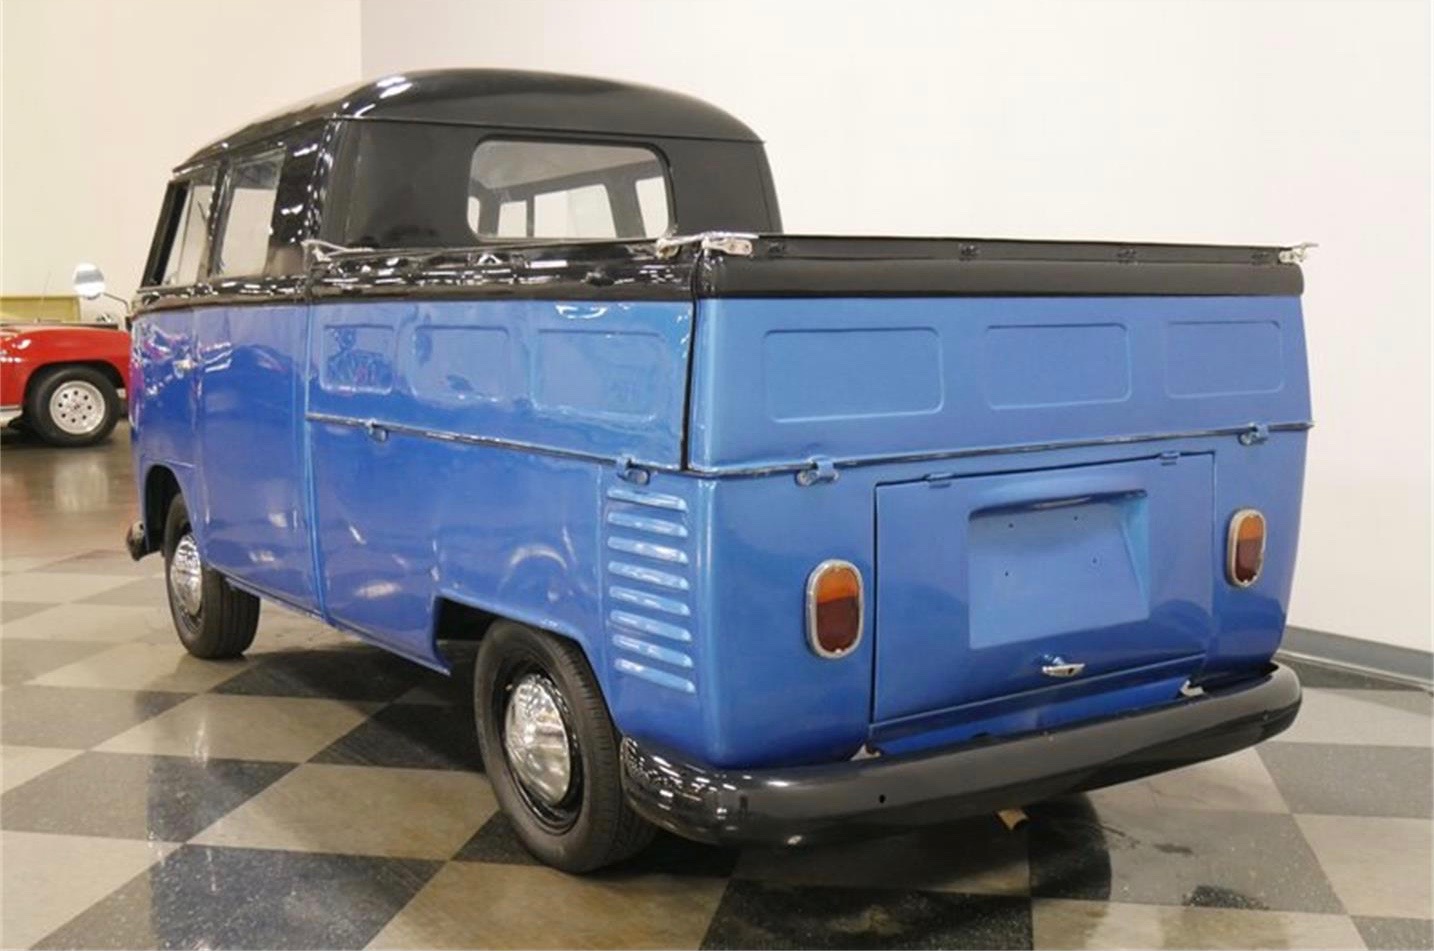 Volkswagen Transporter, Crew cab pickups are popular, but VW did them decades ago, ClassicCars.com Journal